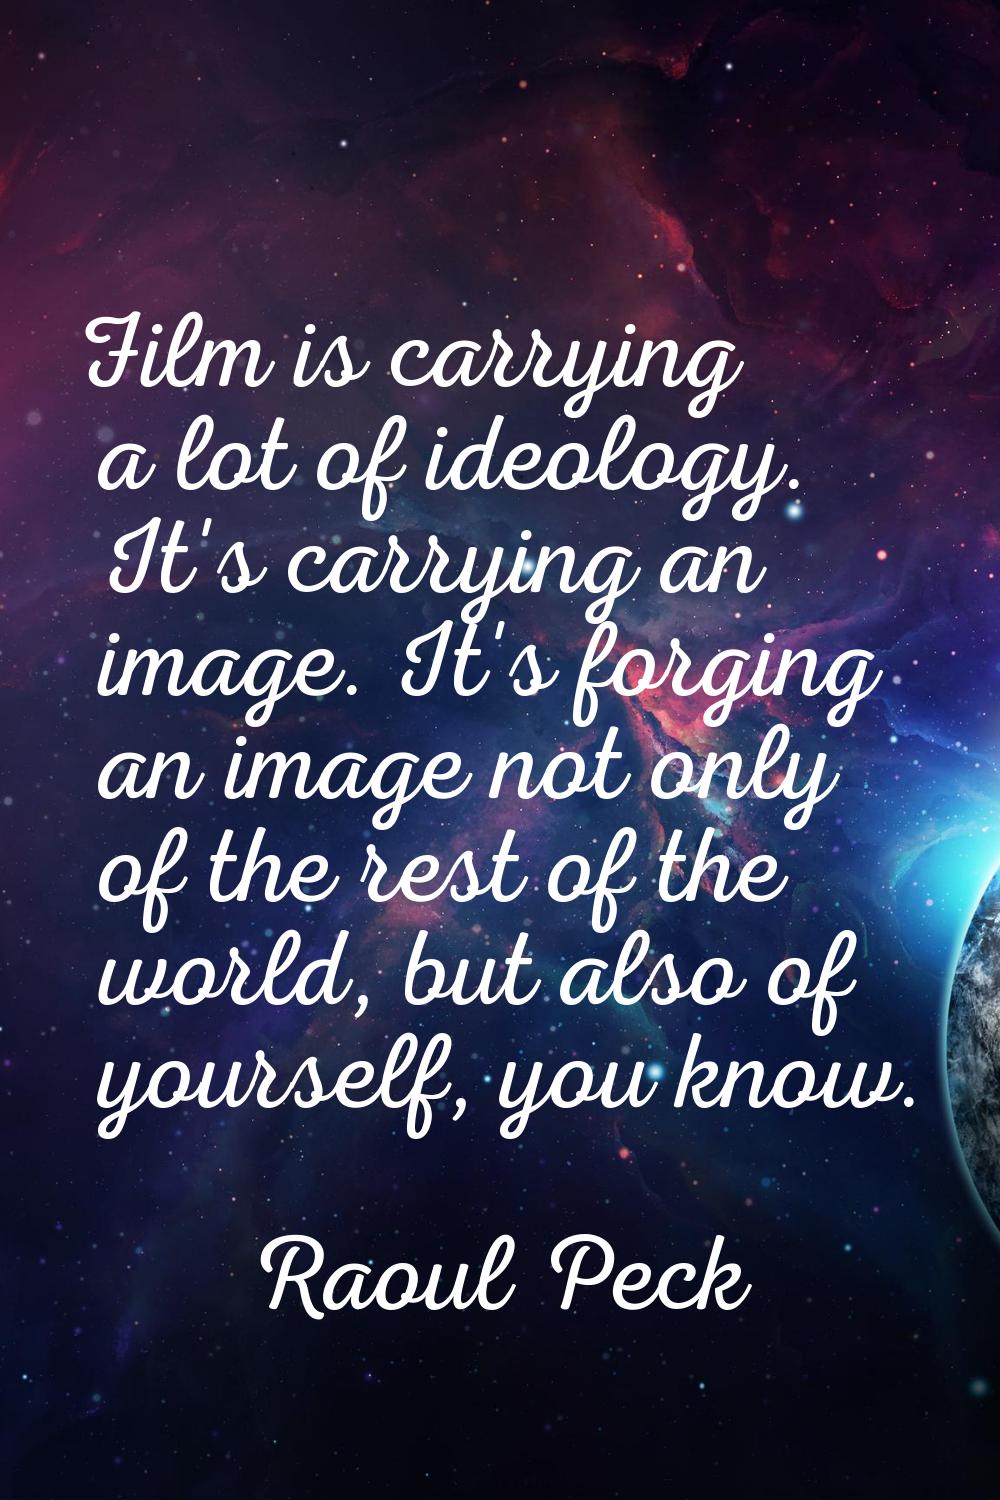 Film is carrying a lot of ideology. It's carrying an image. It's forging an image not only of the r